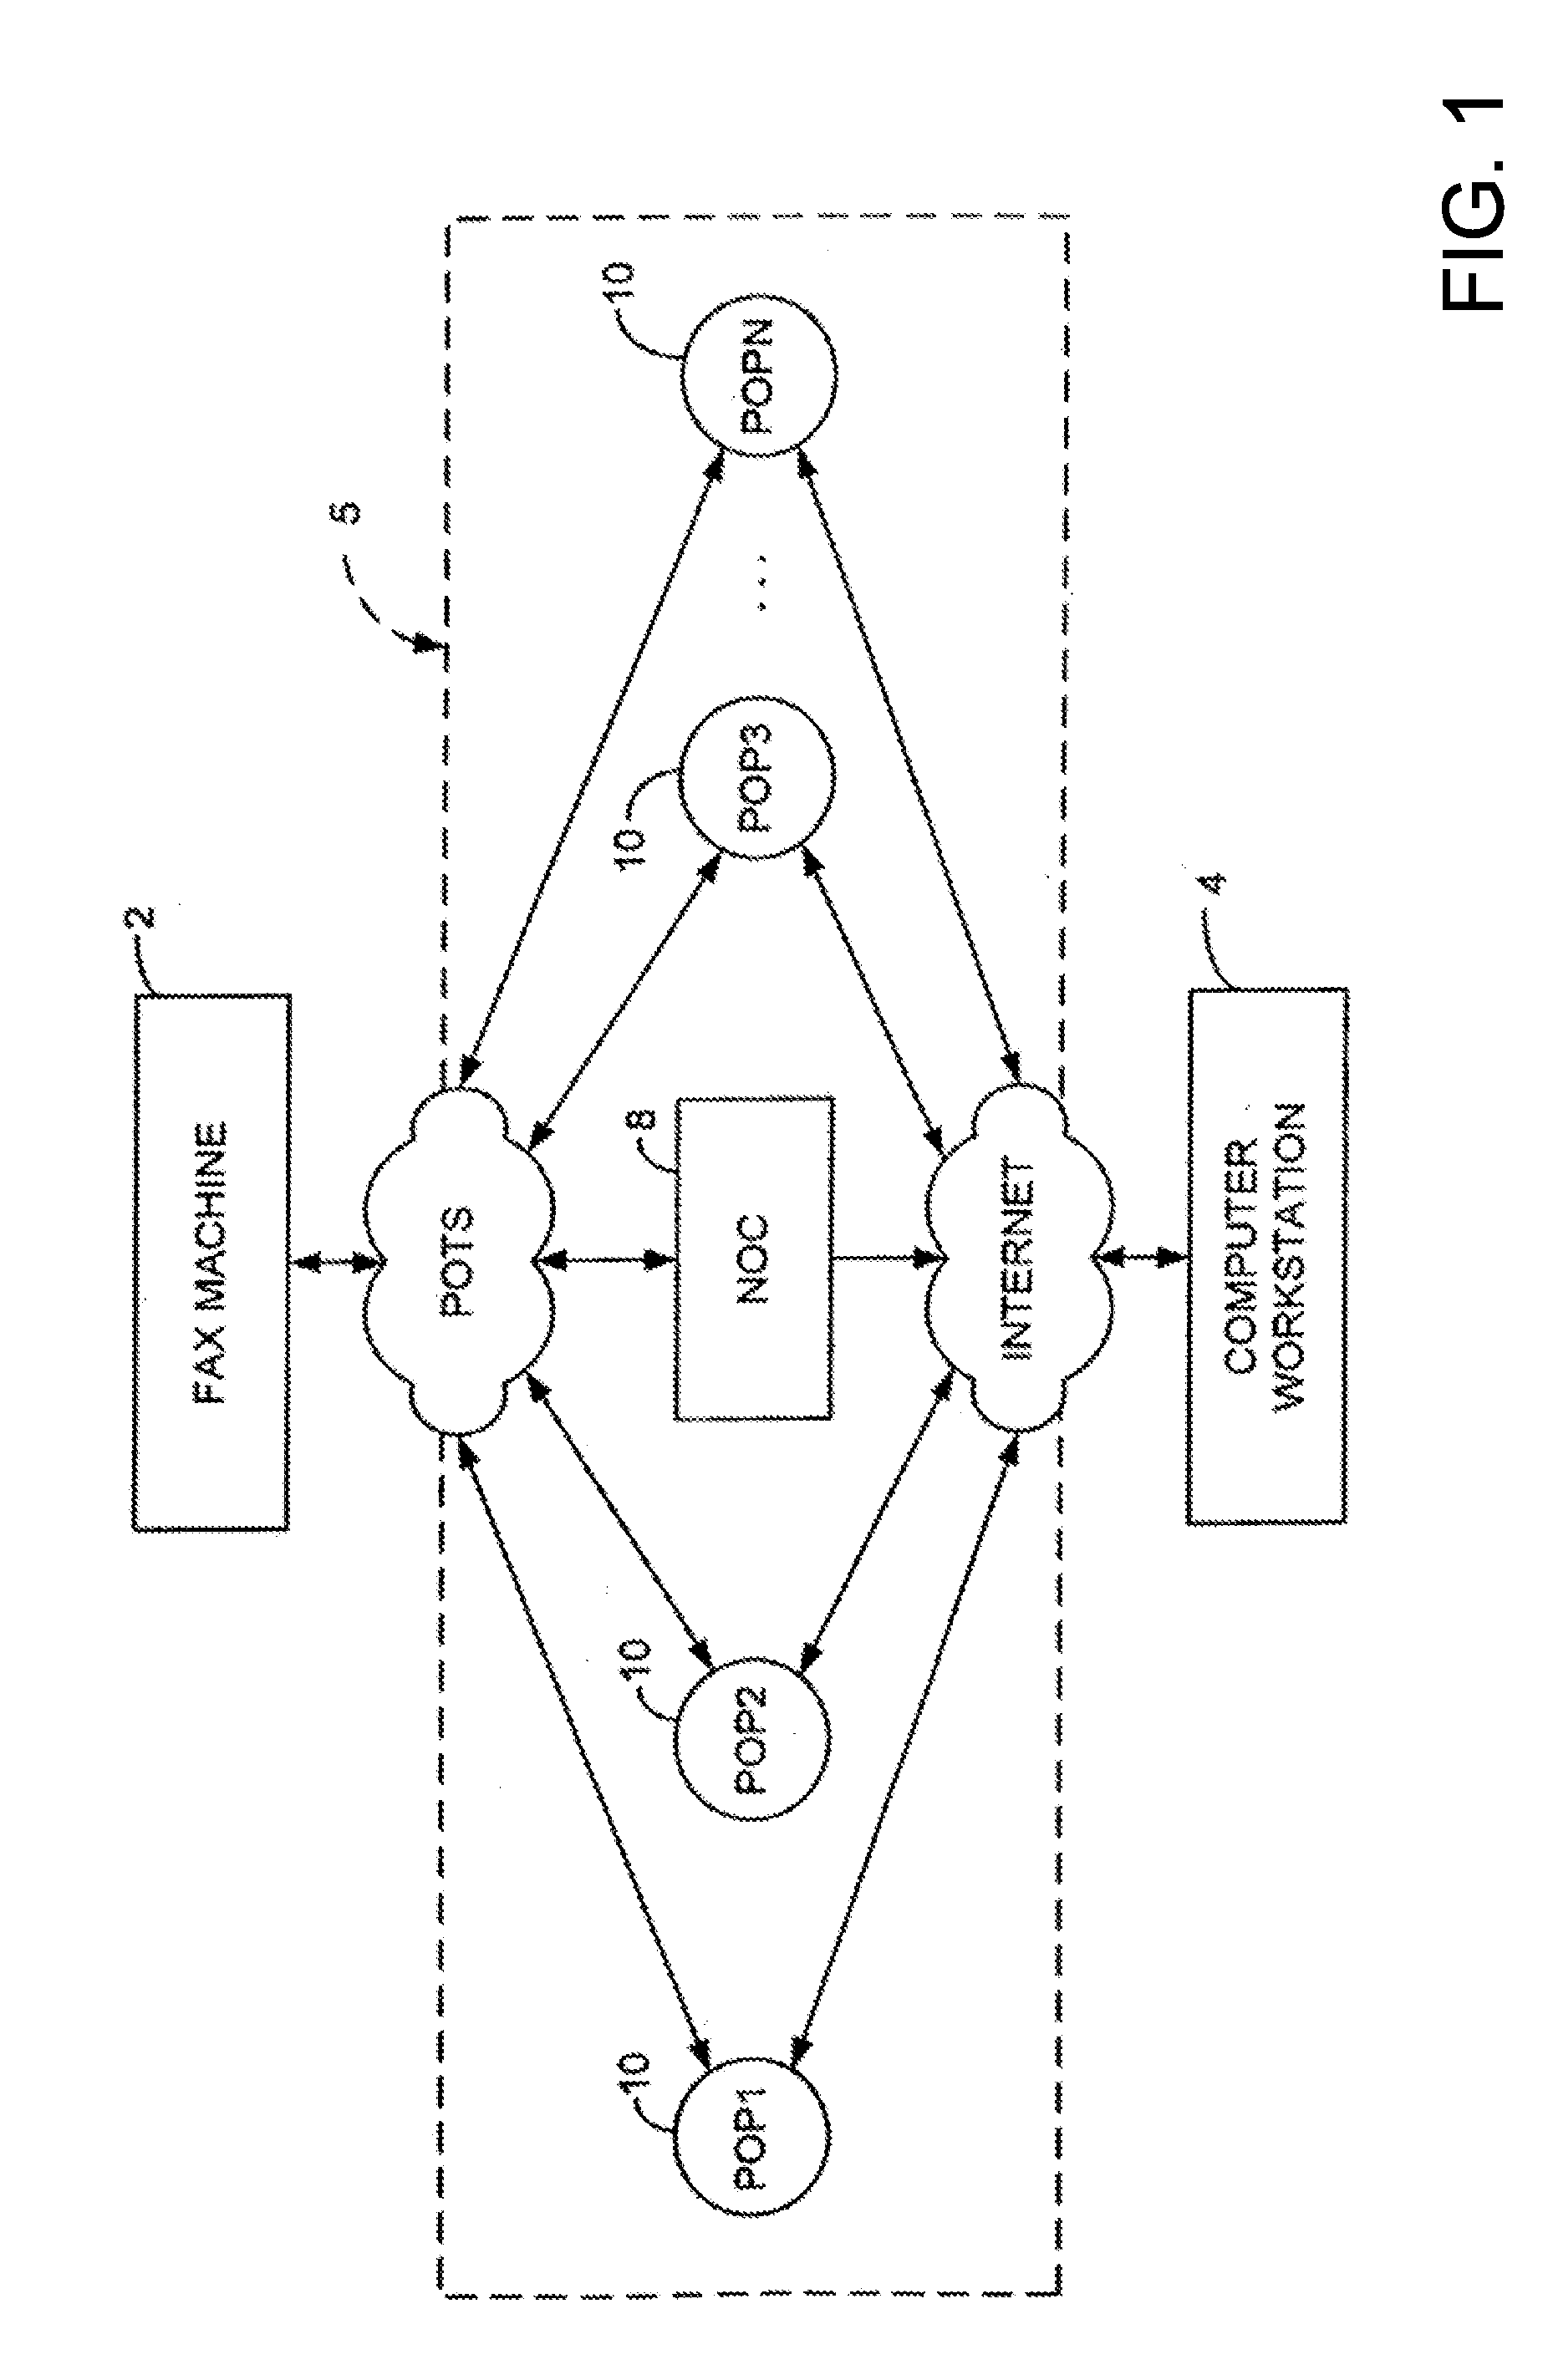 Methods and apparatus for facsimile transmissions to electronic storage destinations including tracking data